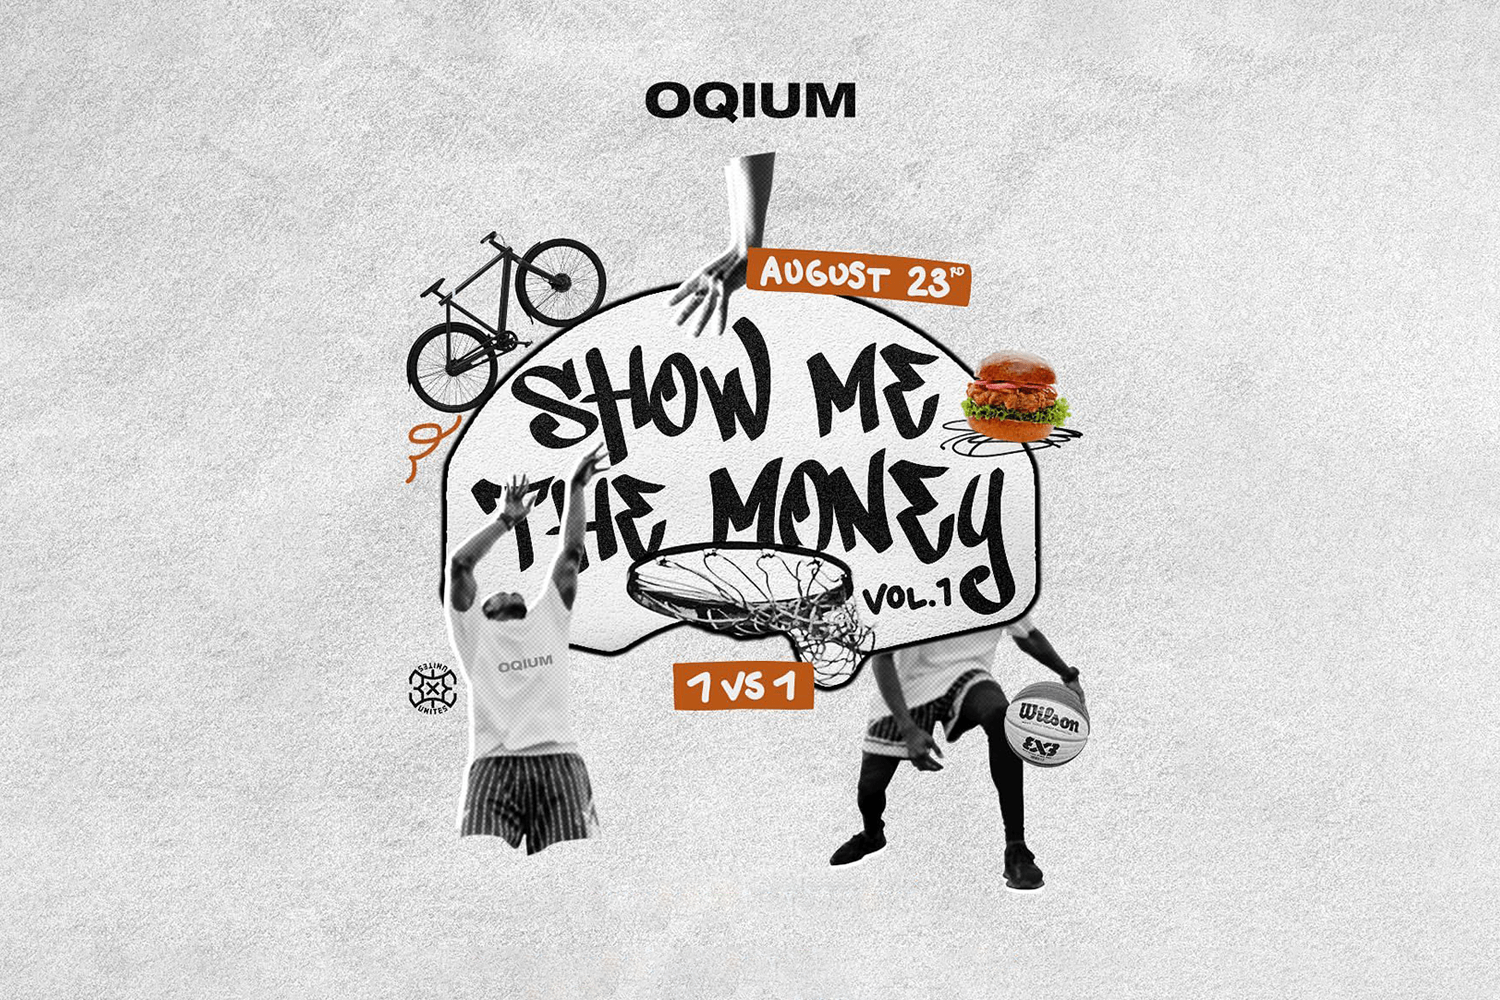 OQIUM 'Show Me The Money' basketball tournament comes to Amsterdam